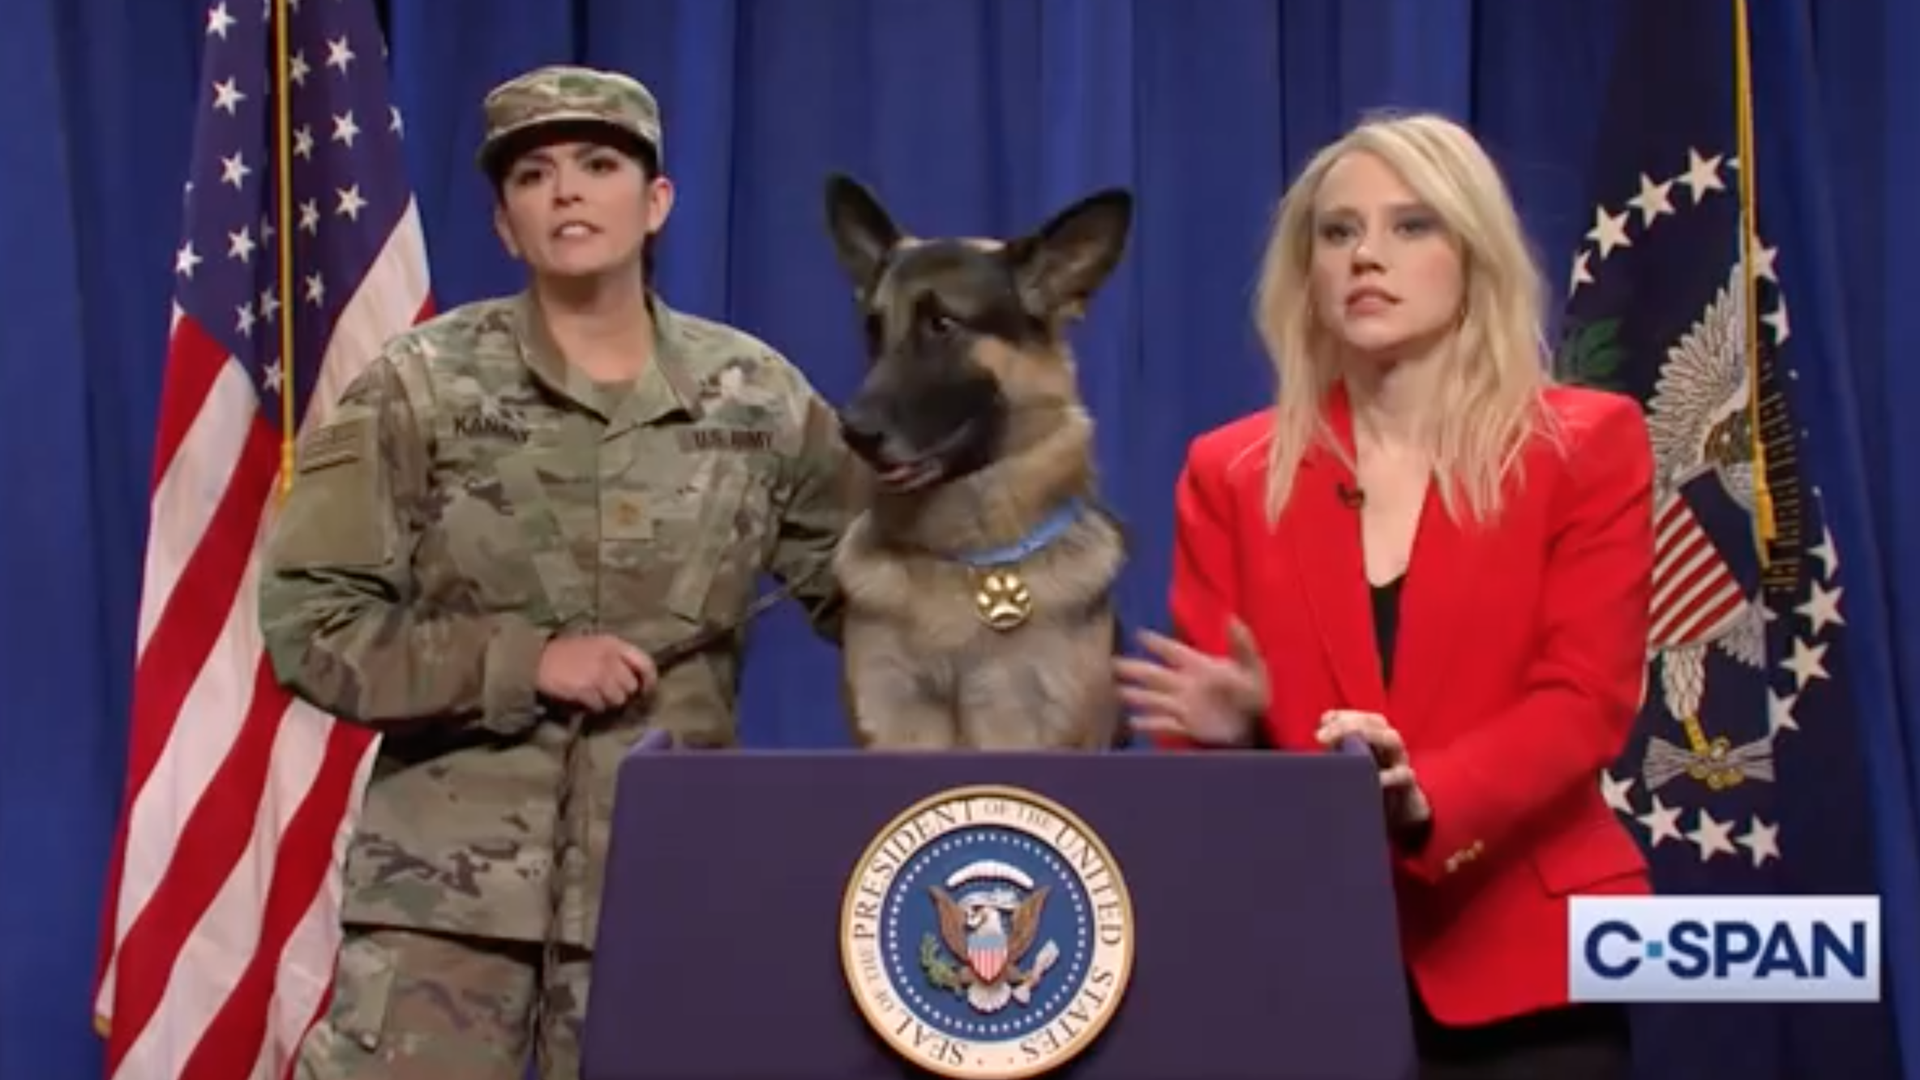 A screenshot of the spoof press conference on NBC's "Saturday Night Live" featuring "Conan the dog."